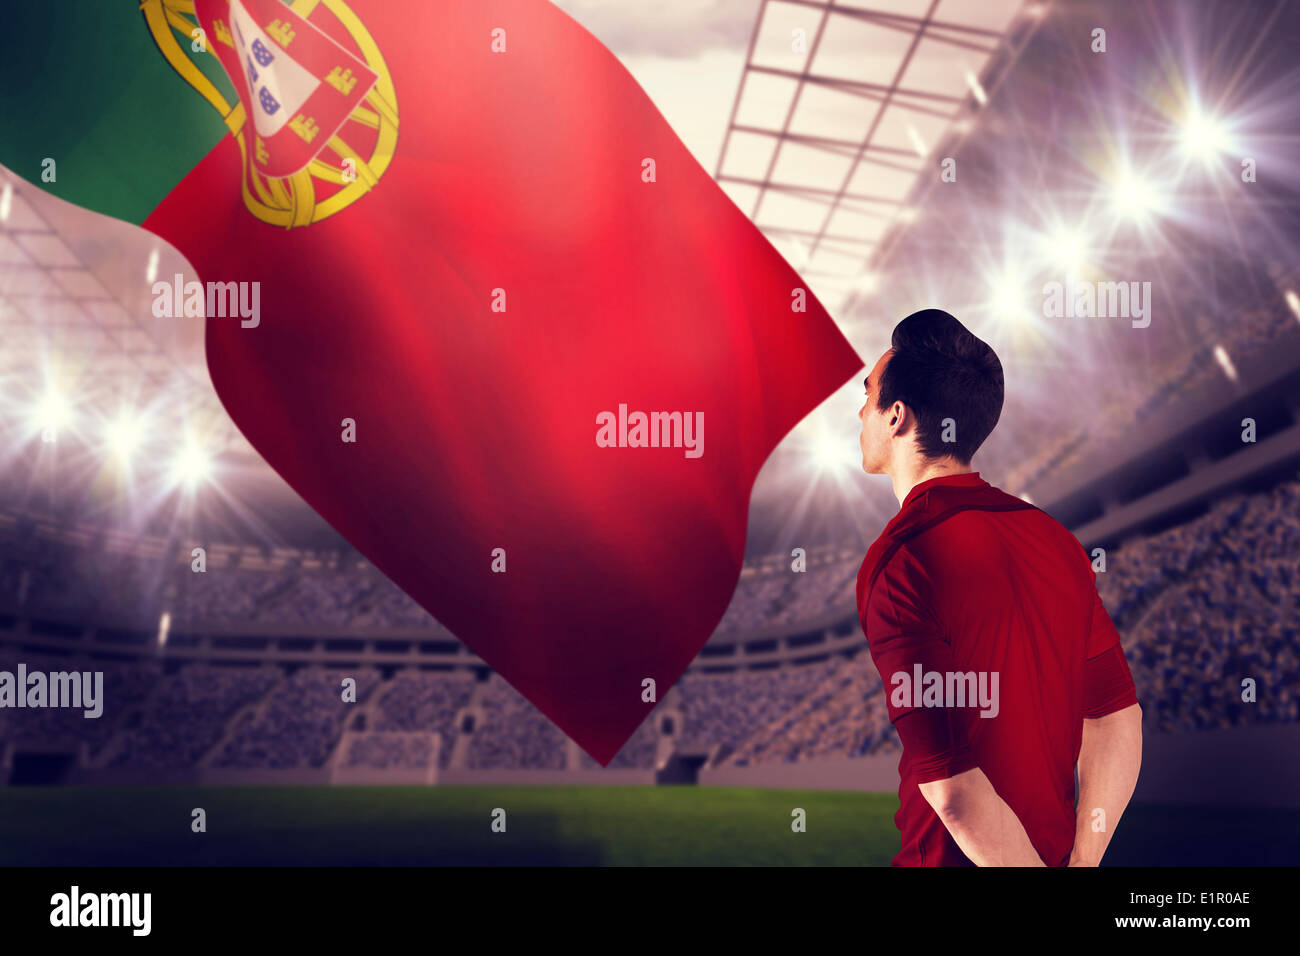 Composite image of football player in red jersey Stock Photo